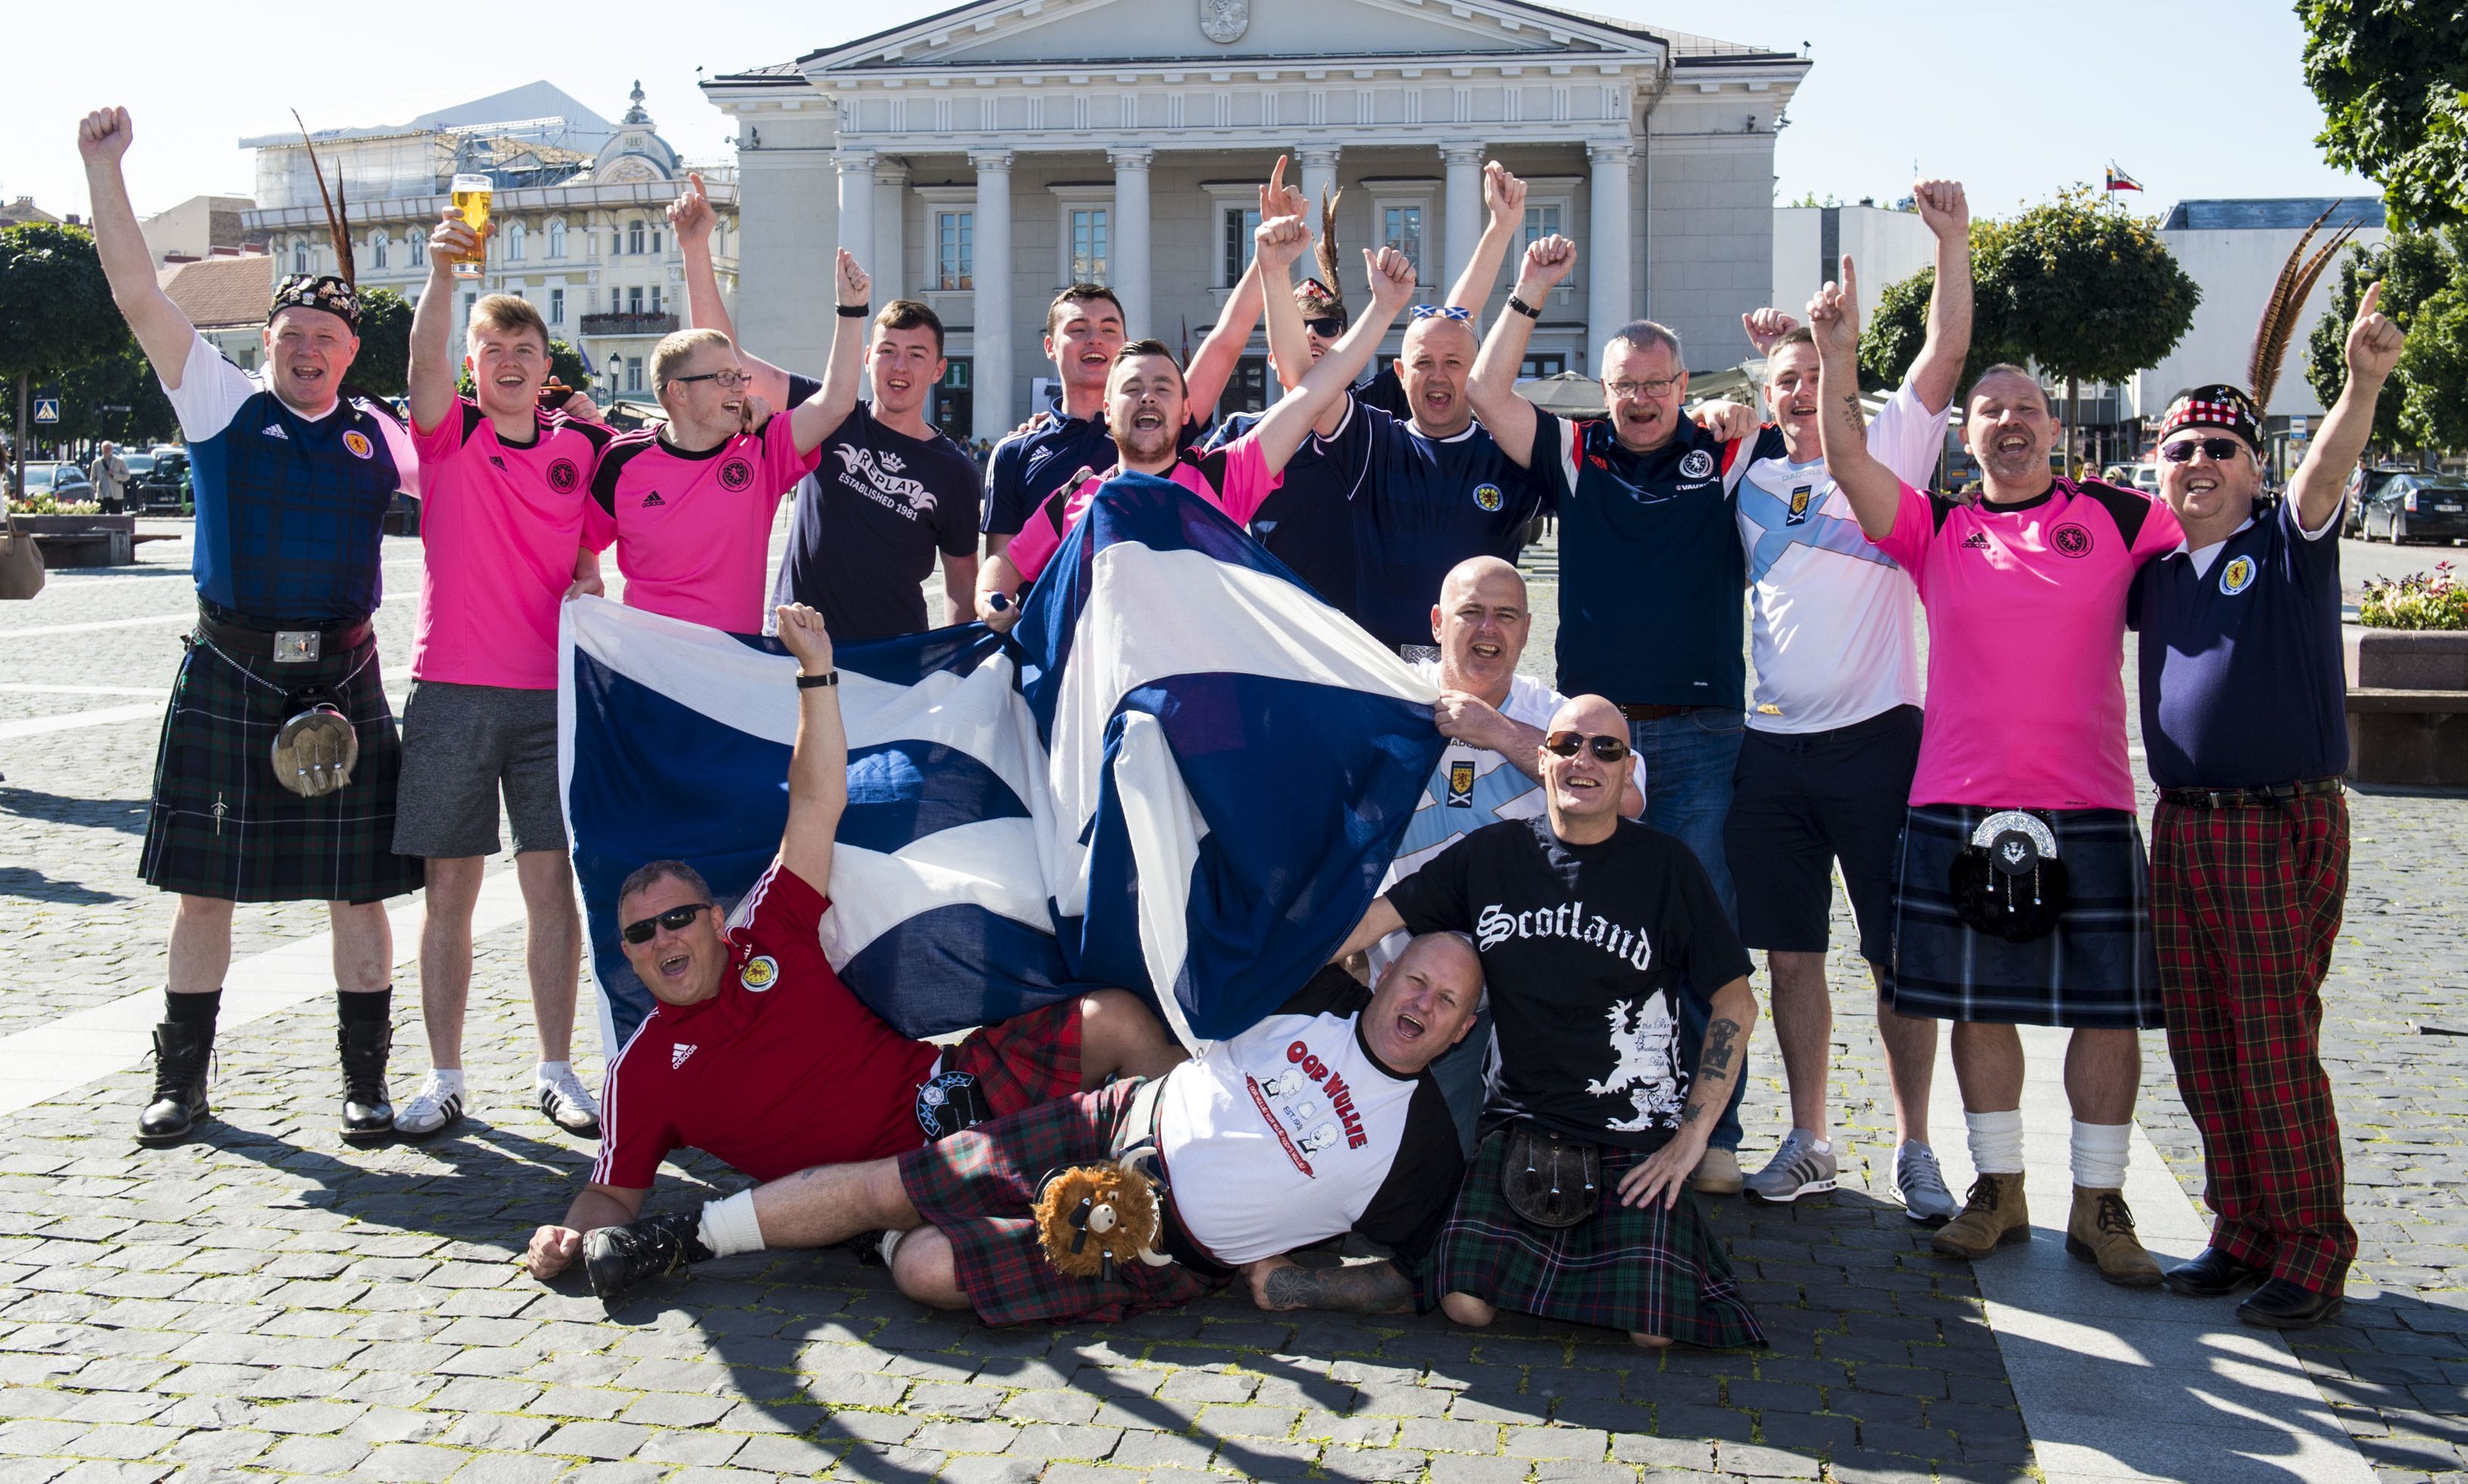 Scotland fans in good spirits out and about in Vilnius.